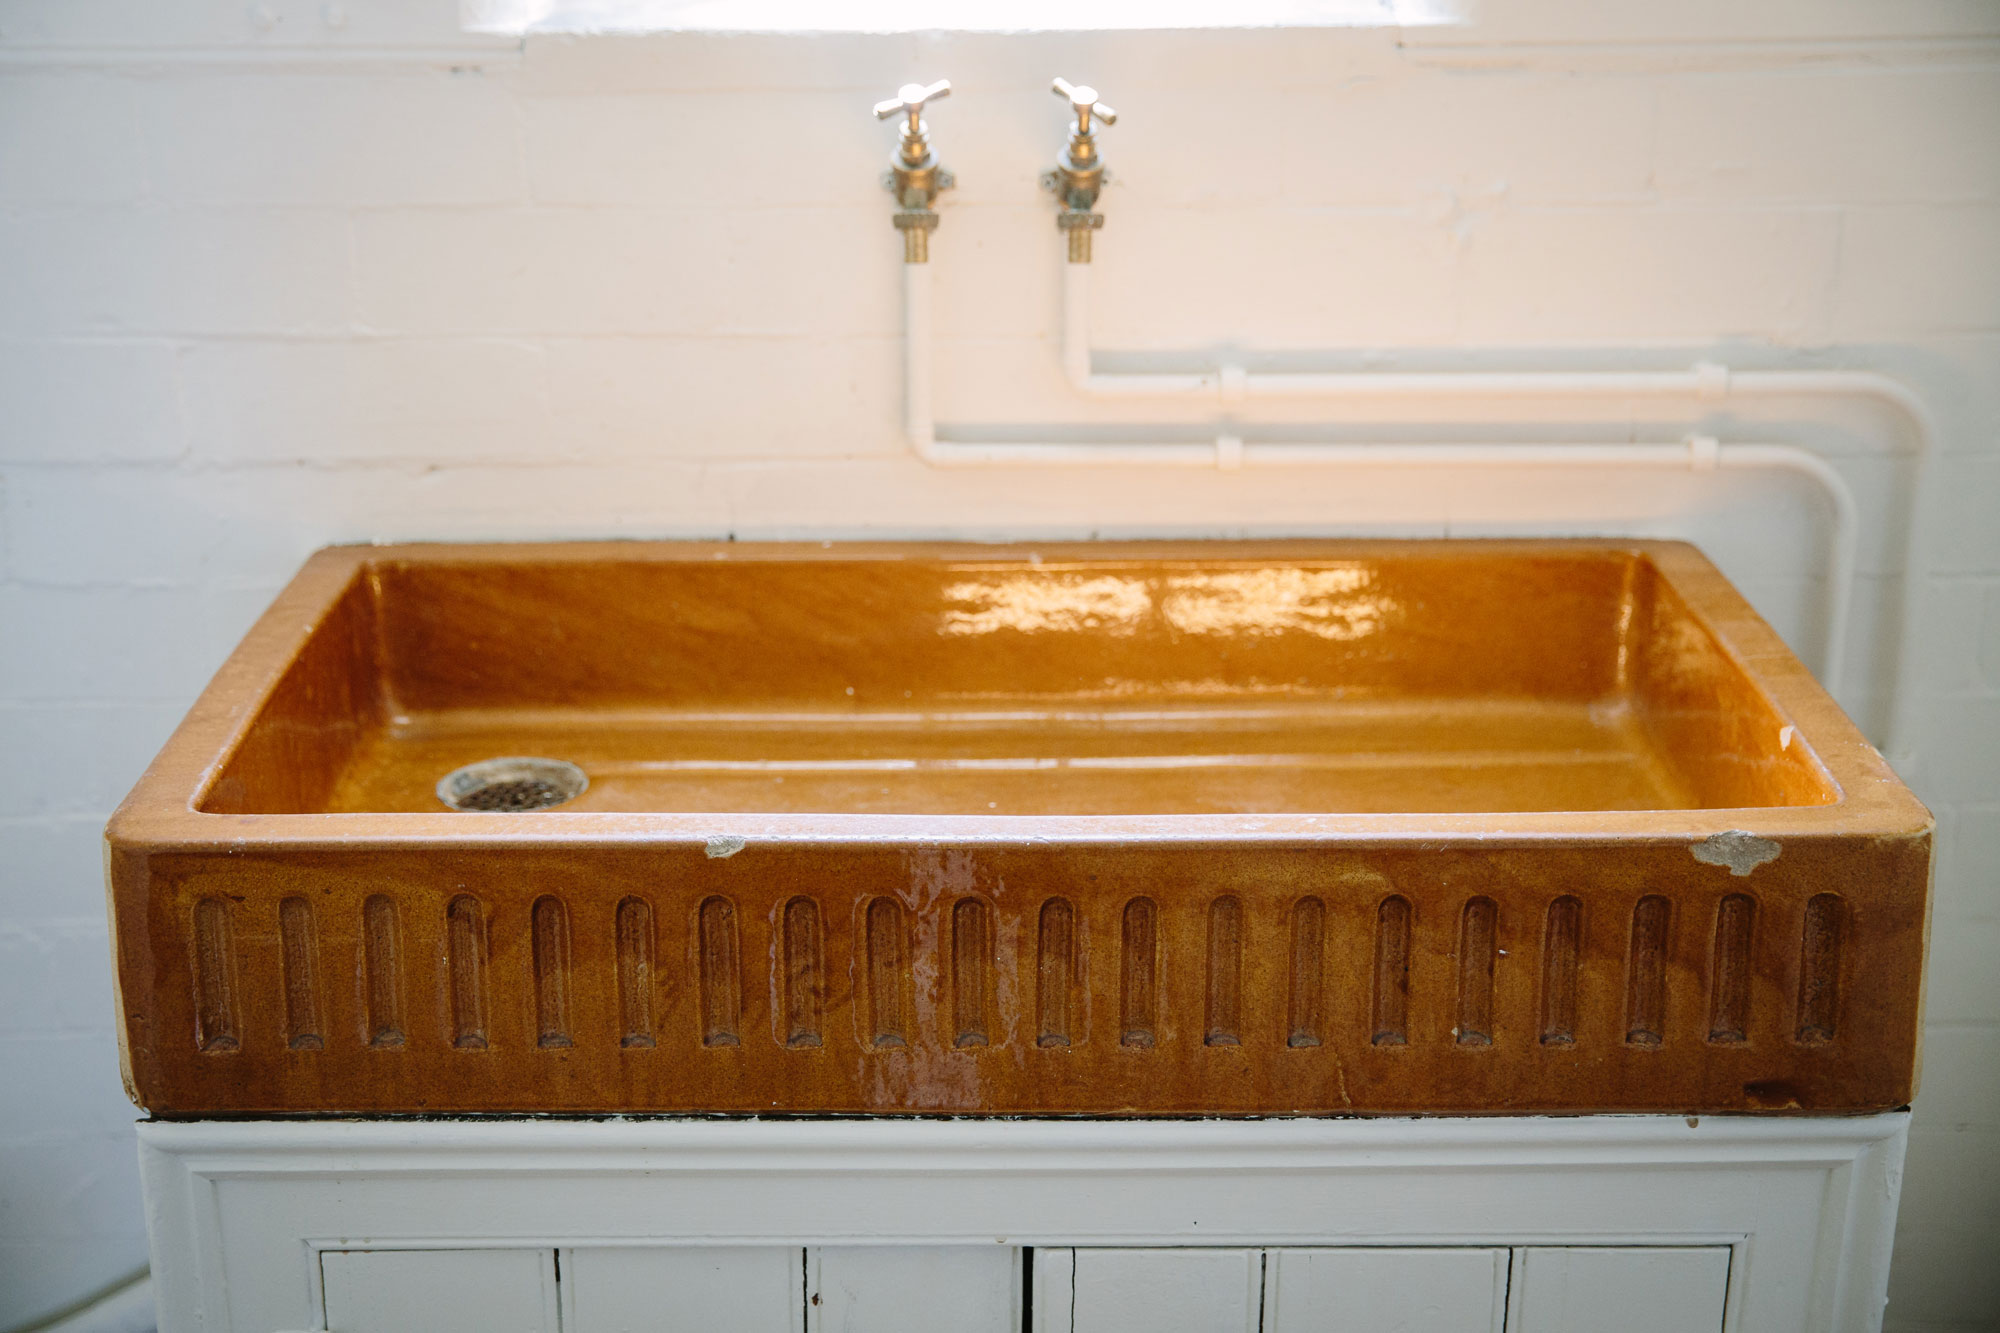 The original sink in the vestibule, how many hands were washed here before lunch?